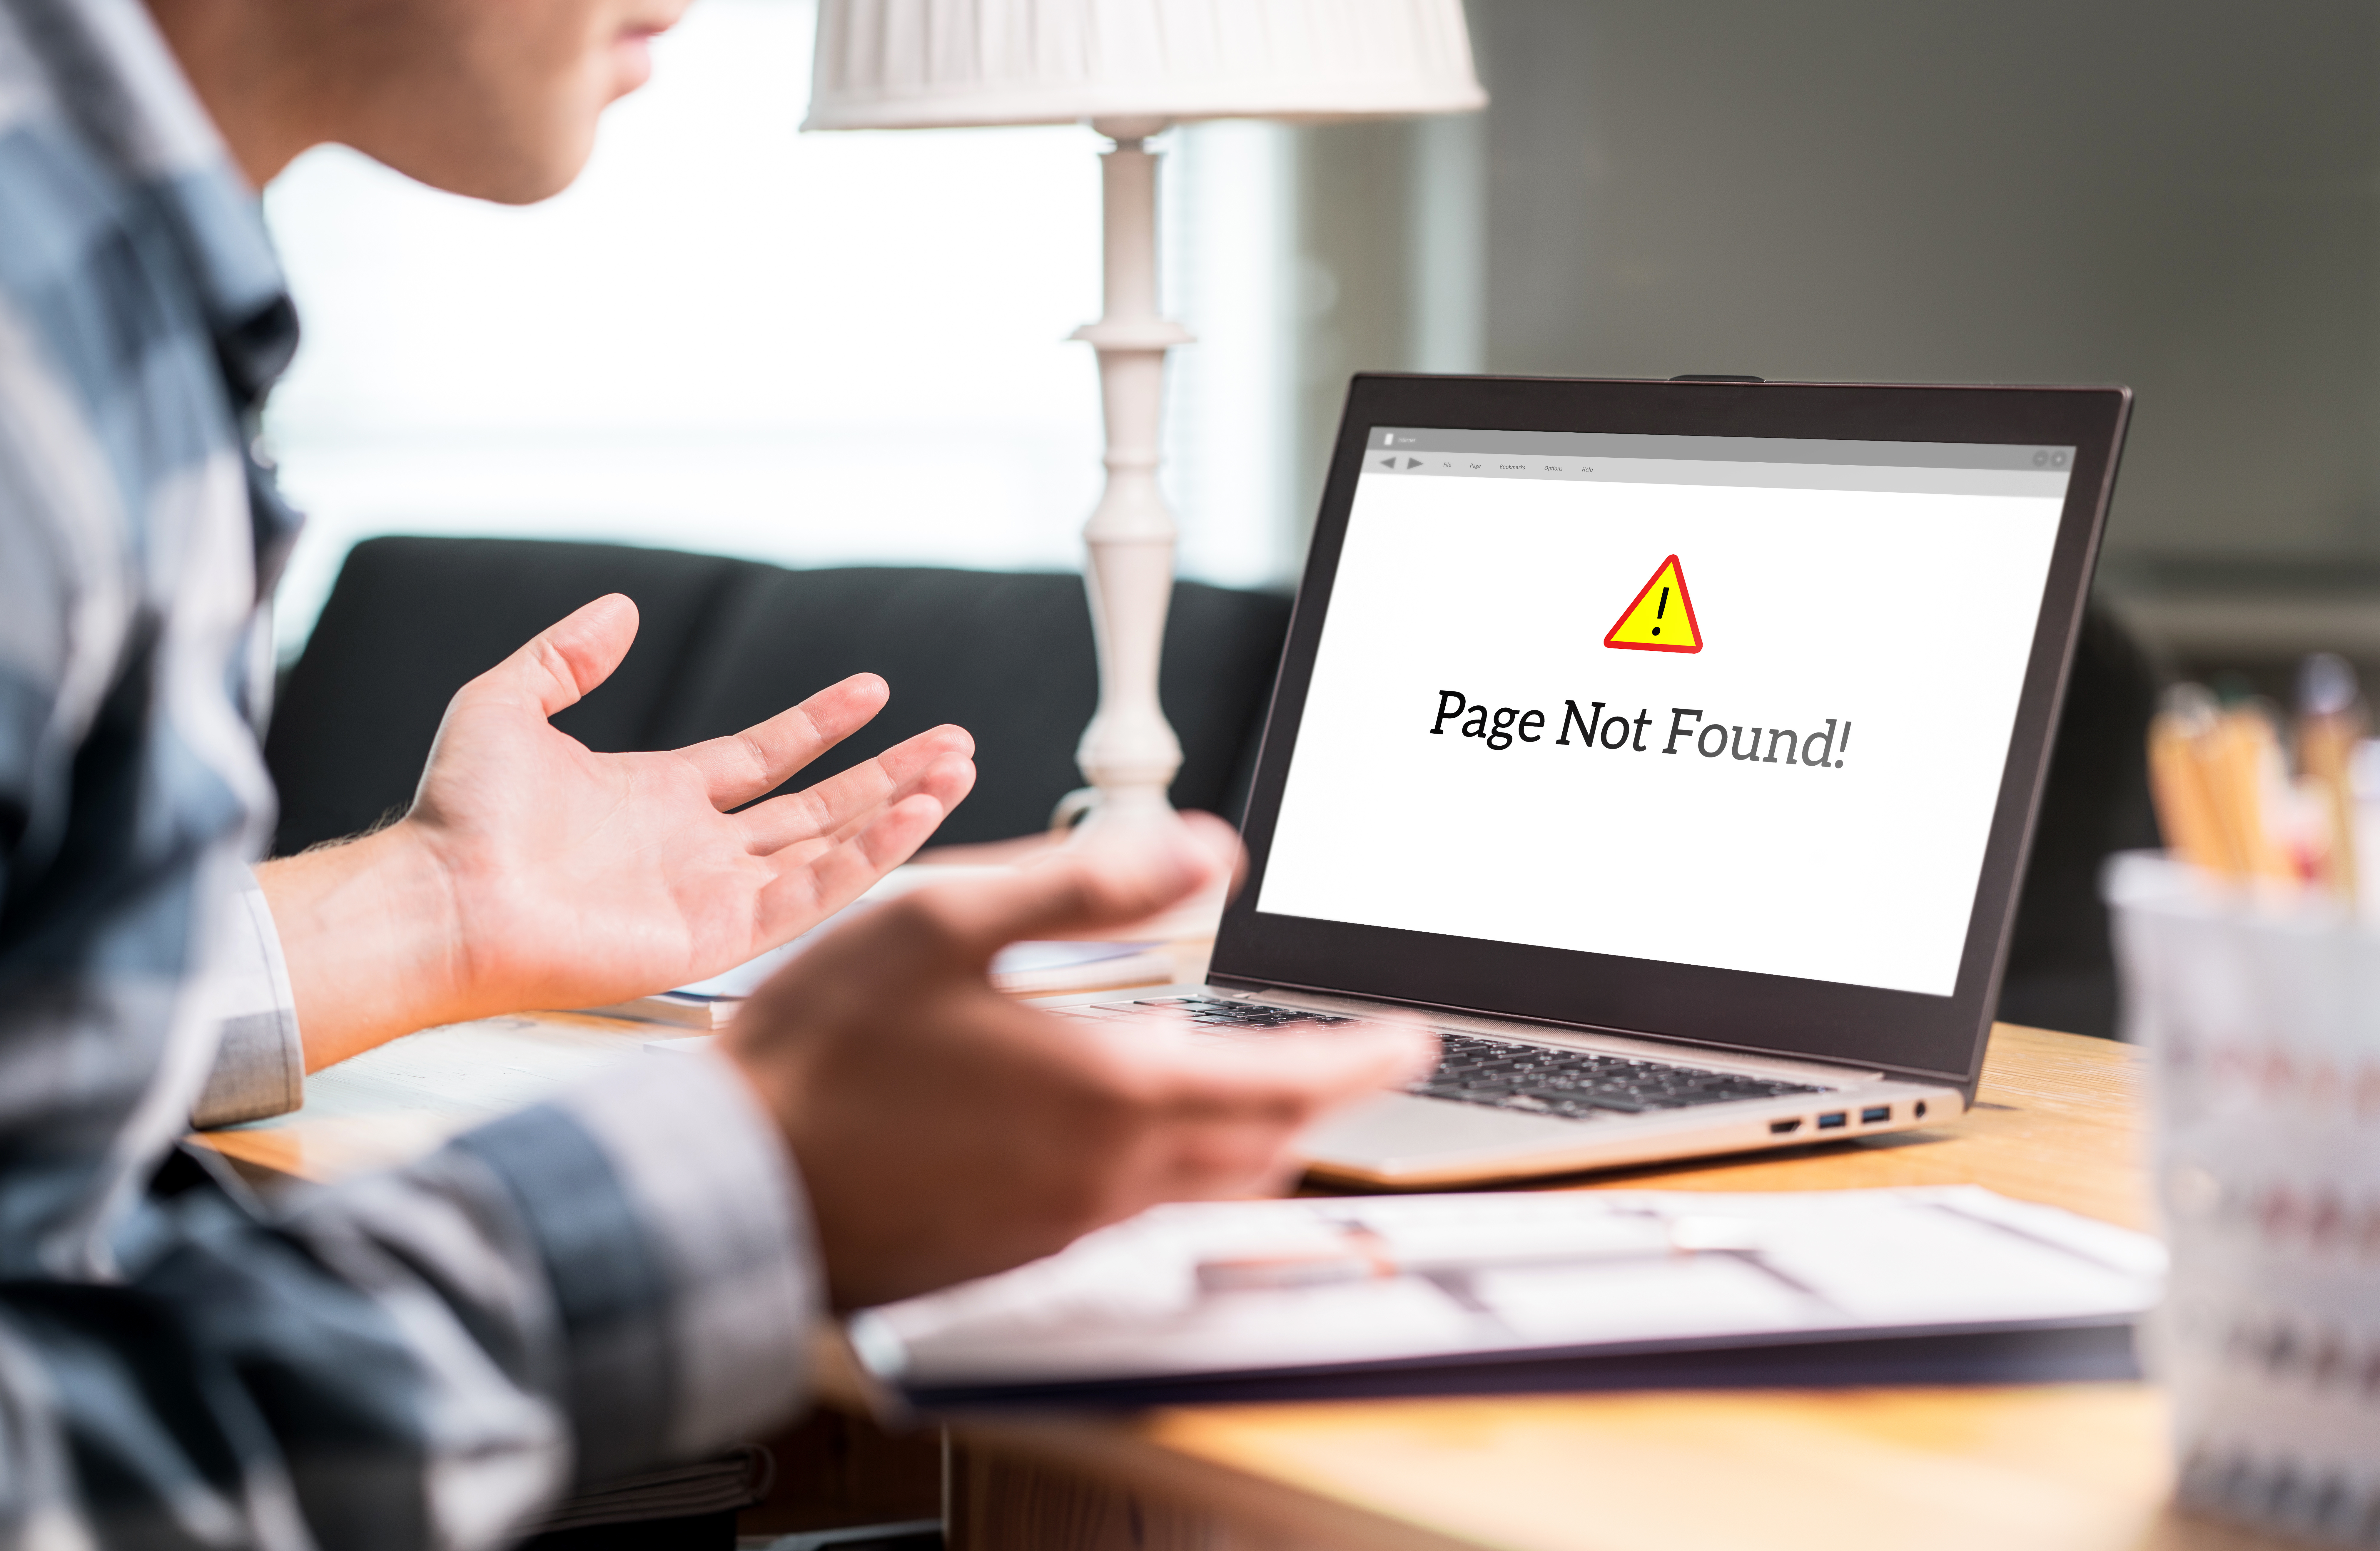 How To Remove A Page From Google